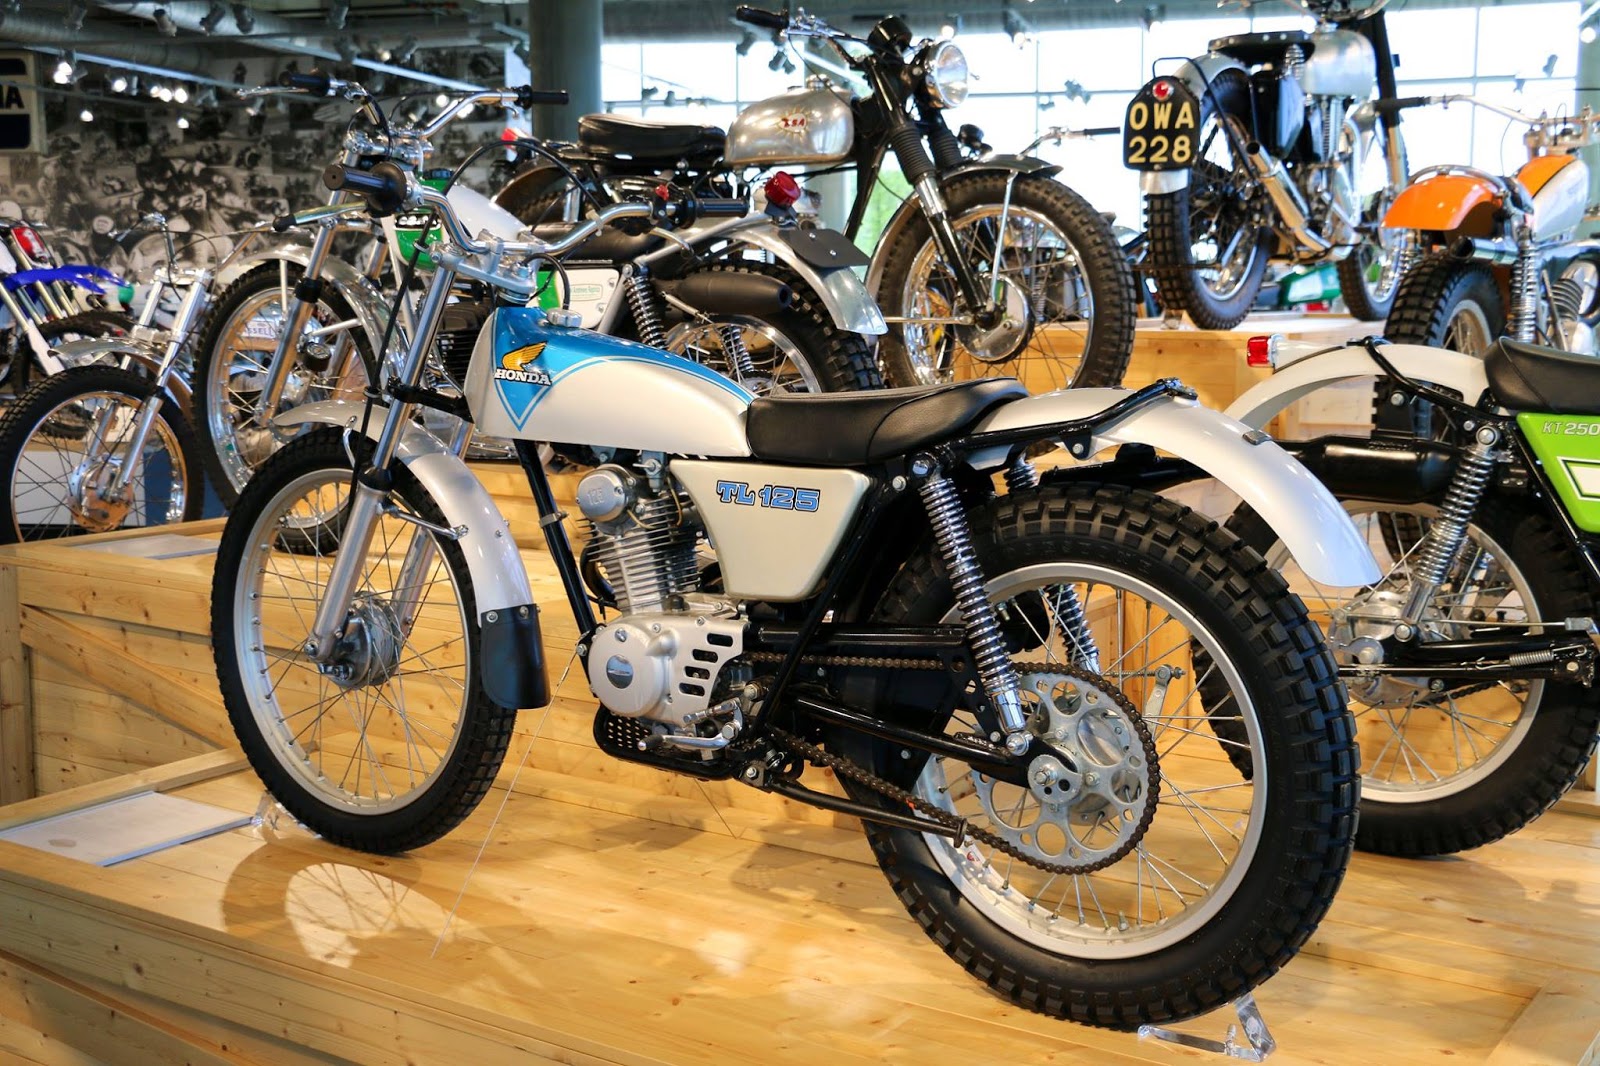 1974 Honda TL125. Photo via Barber Vintage Motorsports Museum Ready for the Porsche Track Experience? Attend Barber Historics, May 18-19 and Barber Small Bore, June 7-9 at Barber Motorsports Park. Tickets available now!